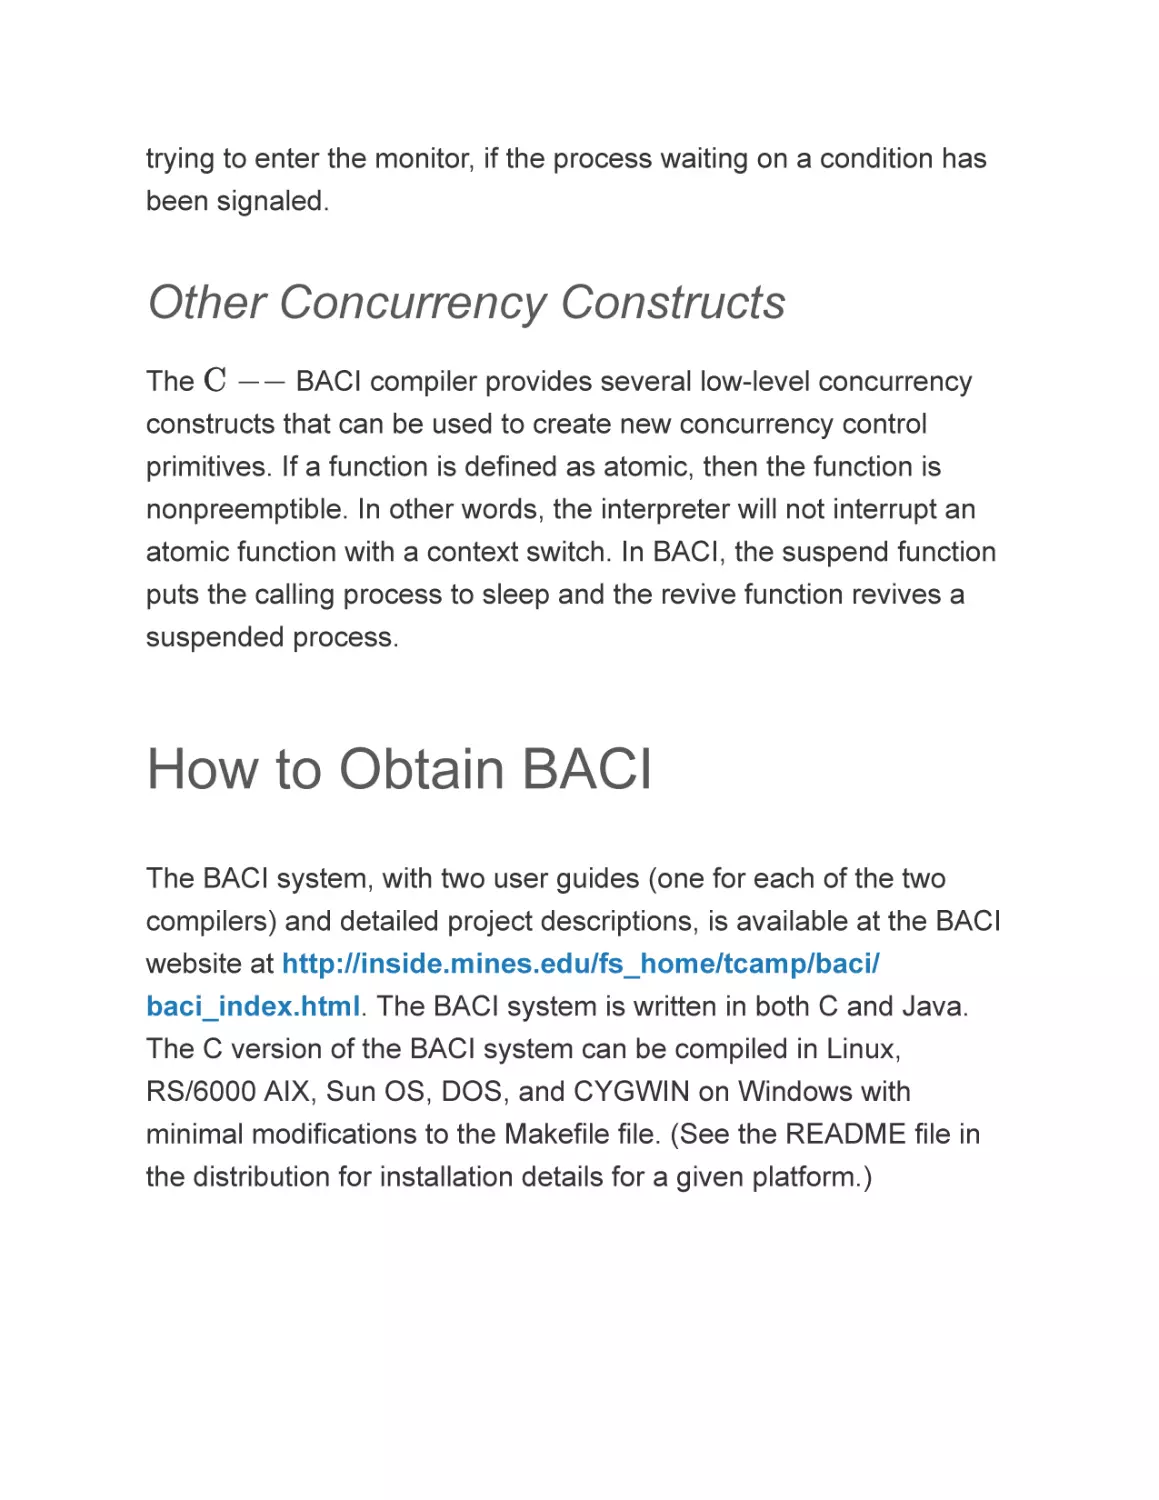 Other Concurrency Constructs
How to Obtain BACI